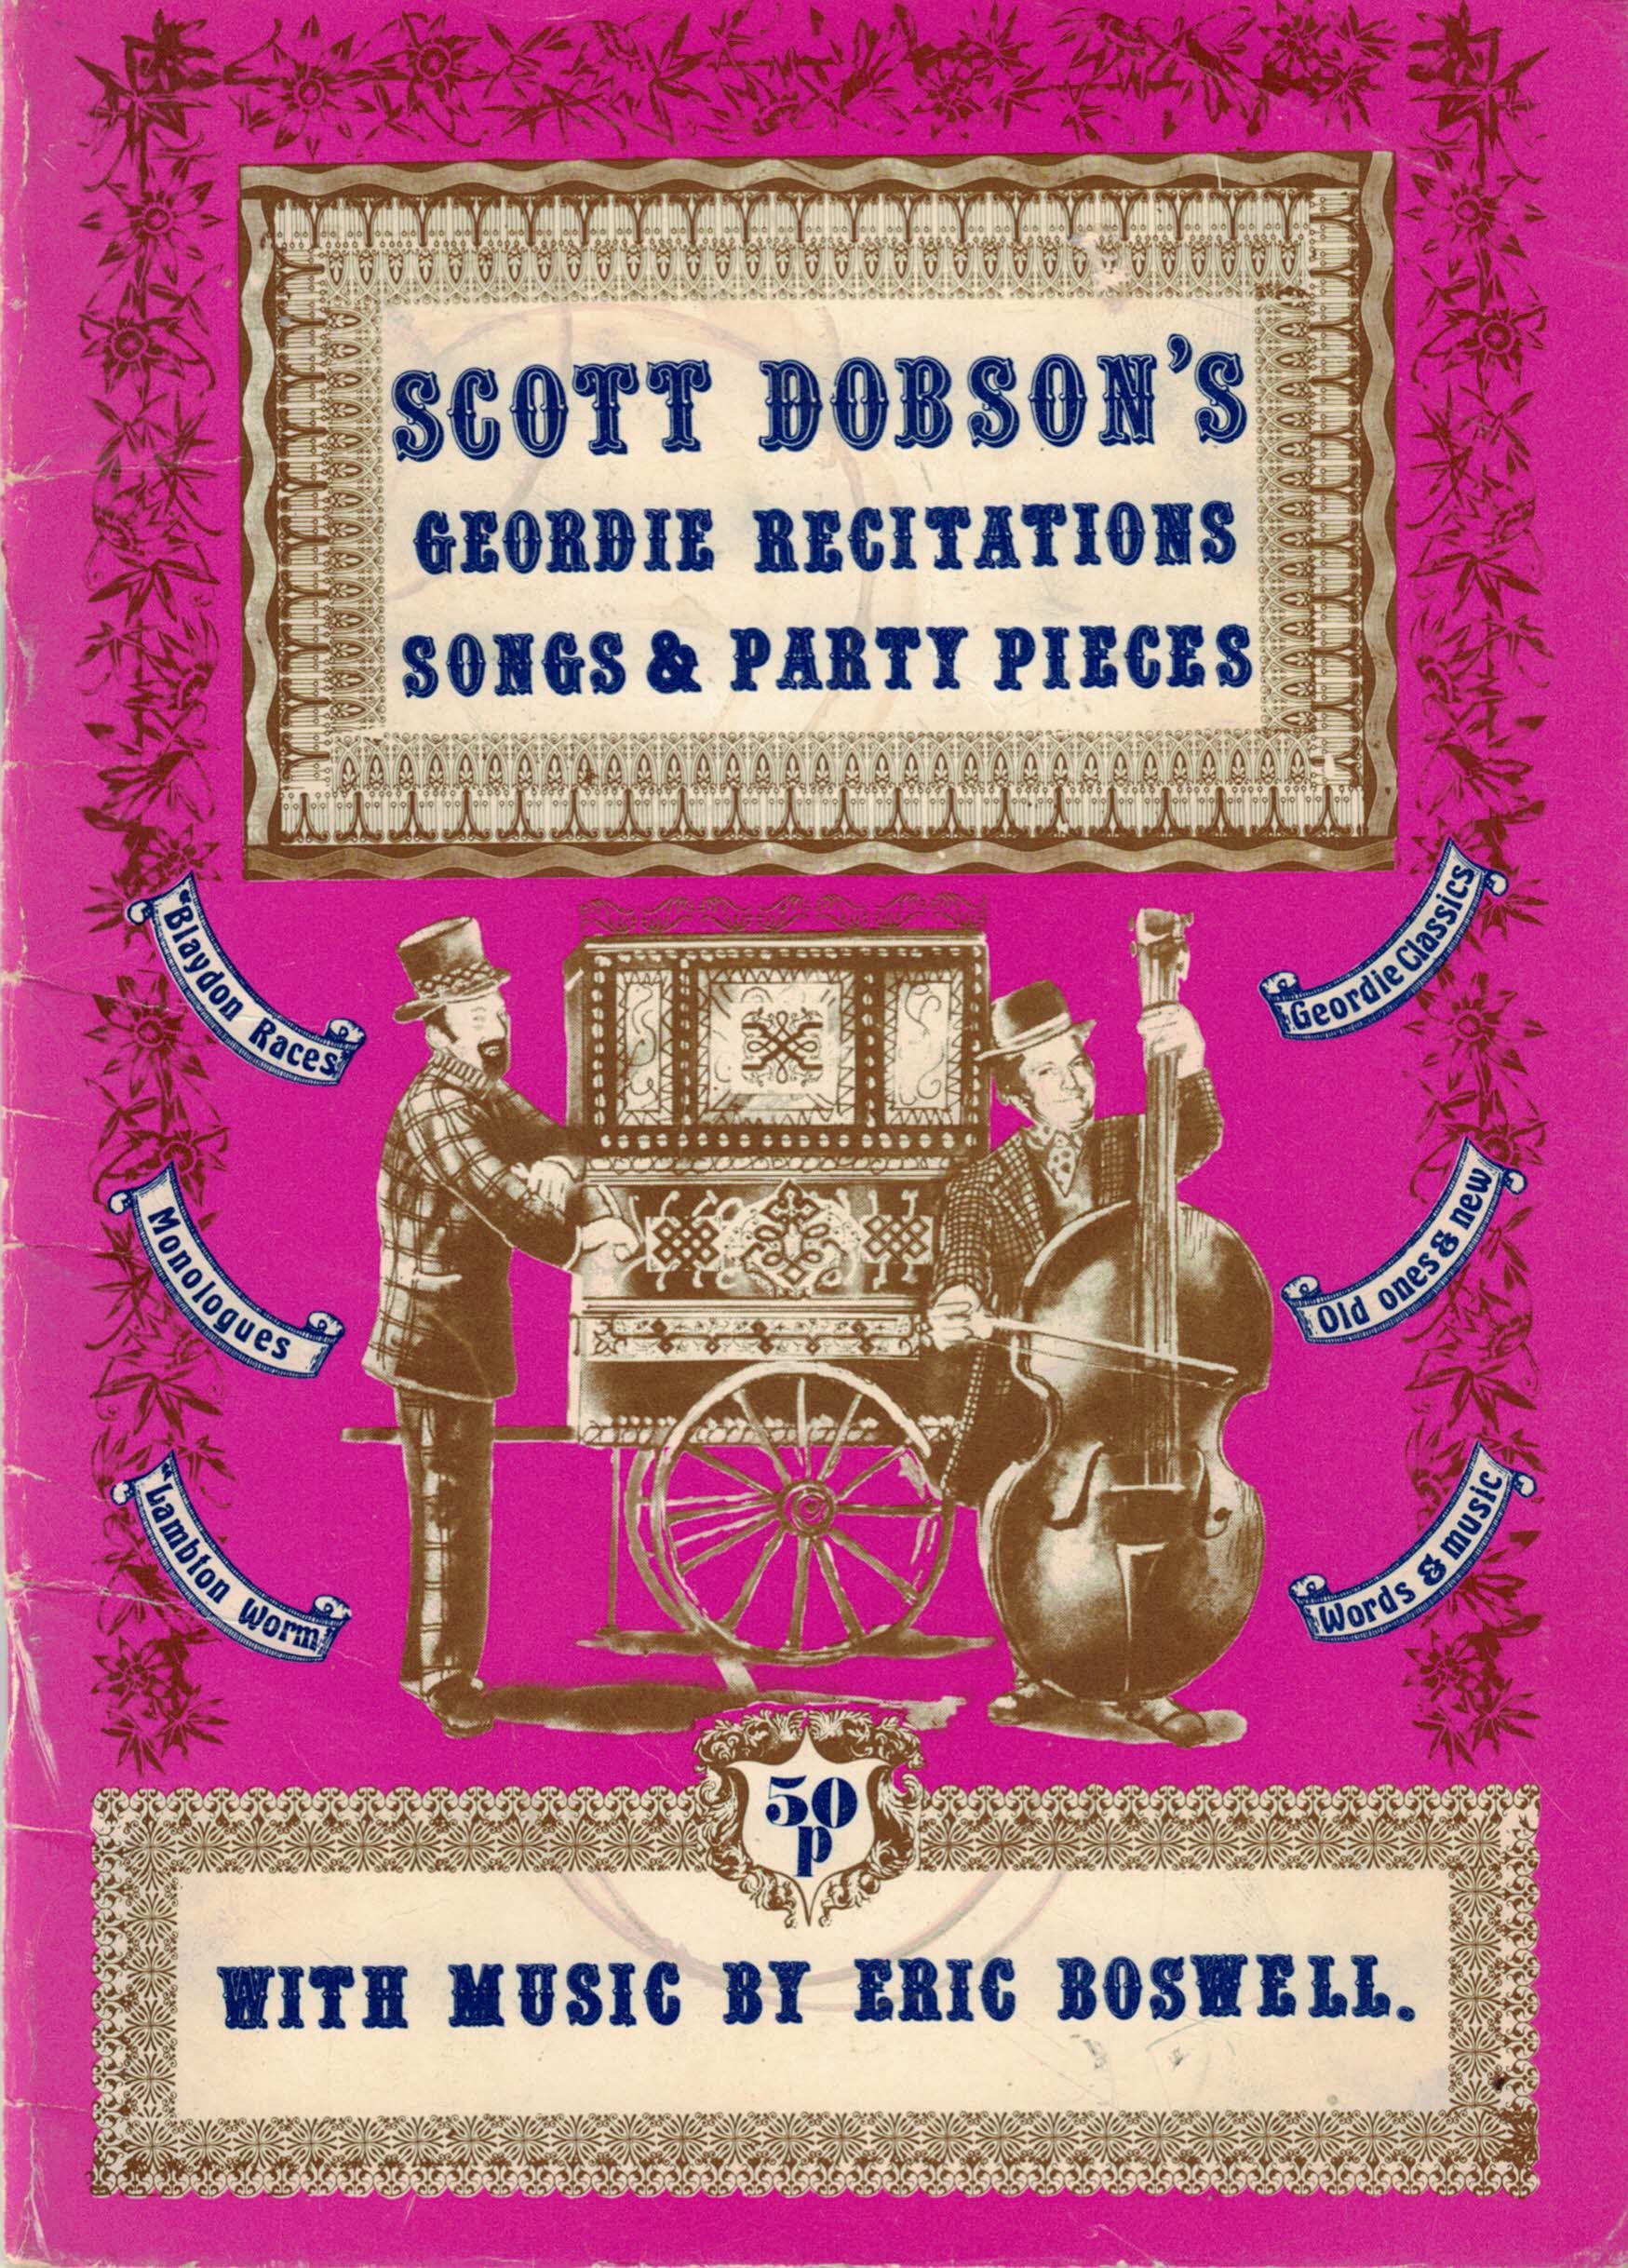 Scott Dobson's Geordie Recitations Songs and Party Pieces. With Music by Eric Boswell.